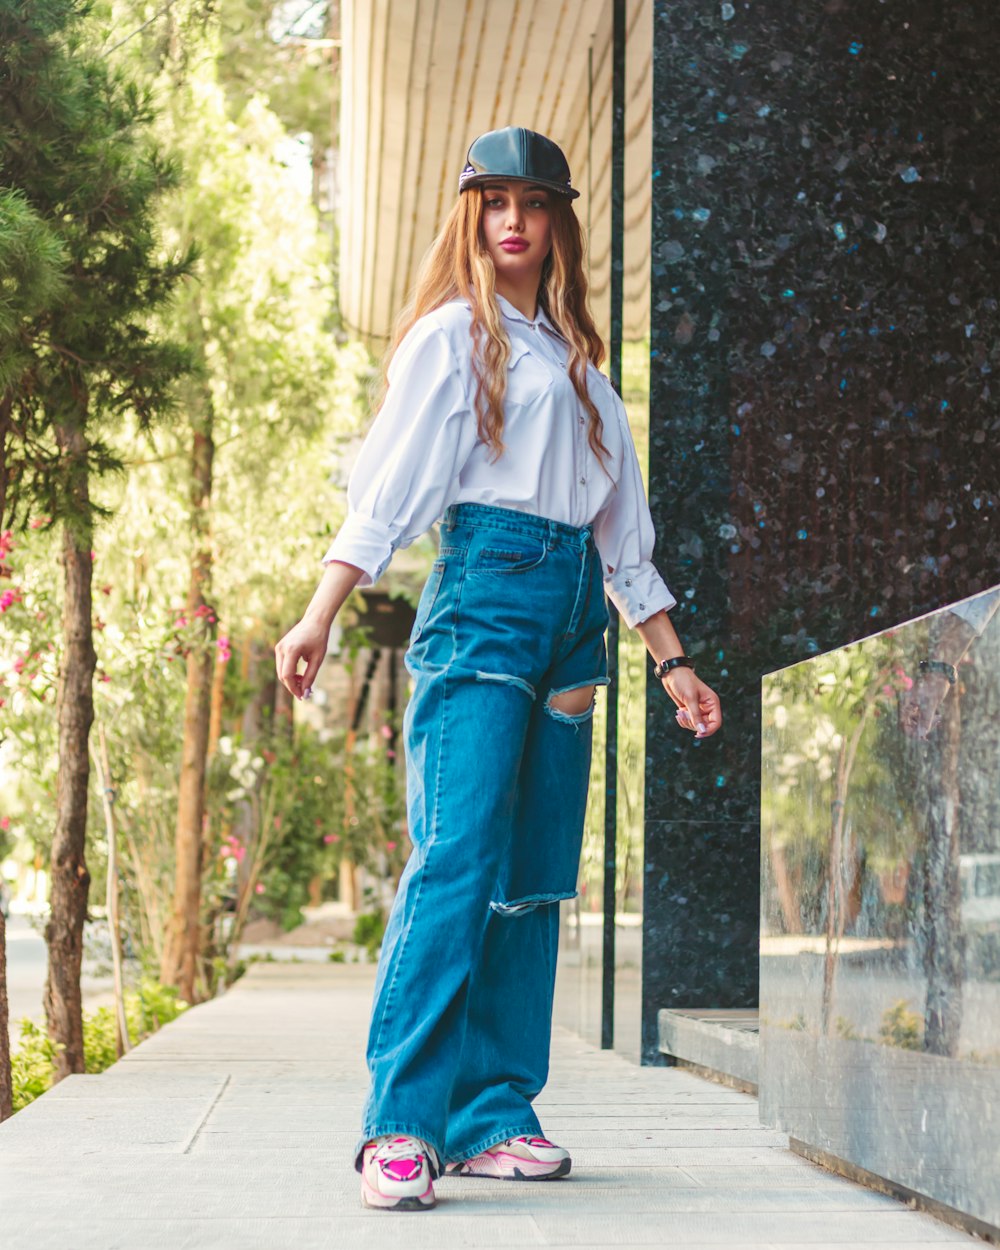 a woman in a white shirt and blue jeans